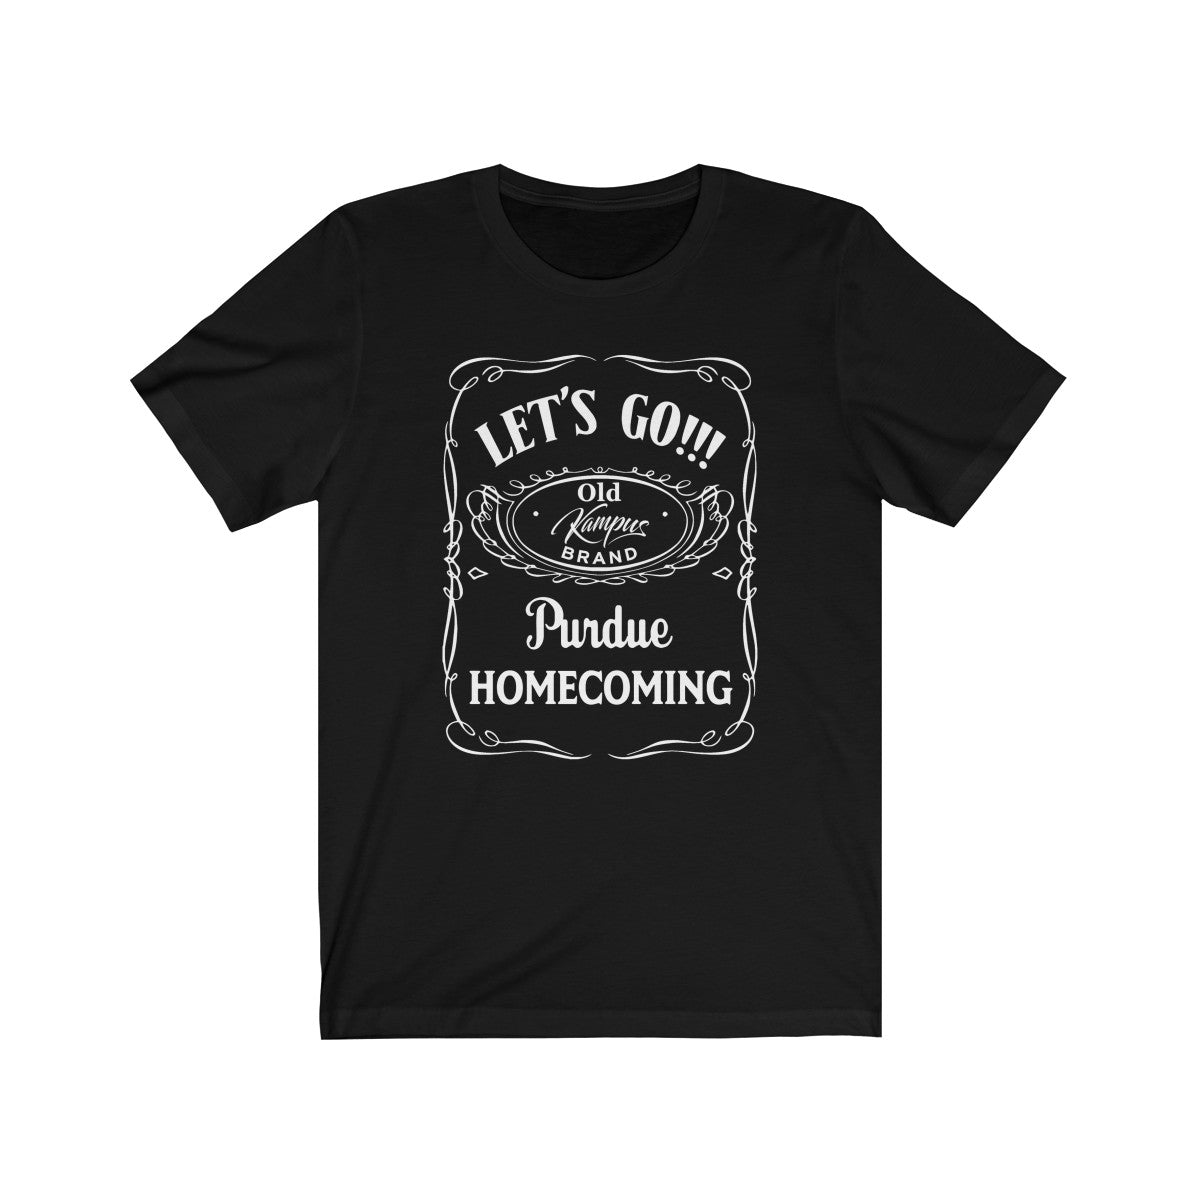 Purdue: Homecoming "Let's Go" T-Shirt